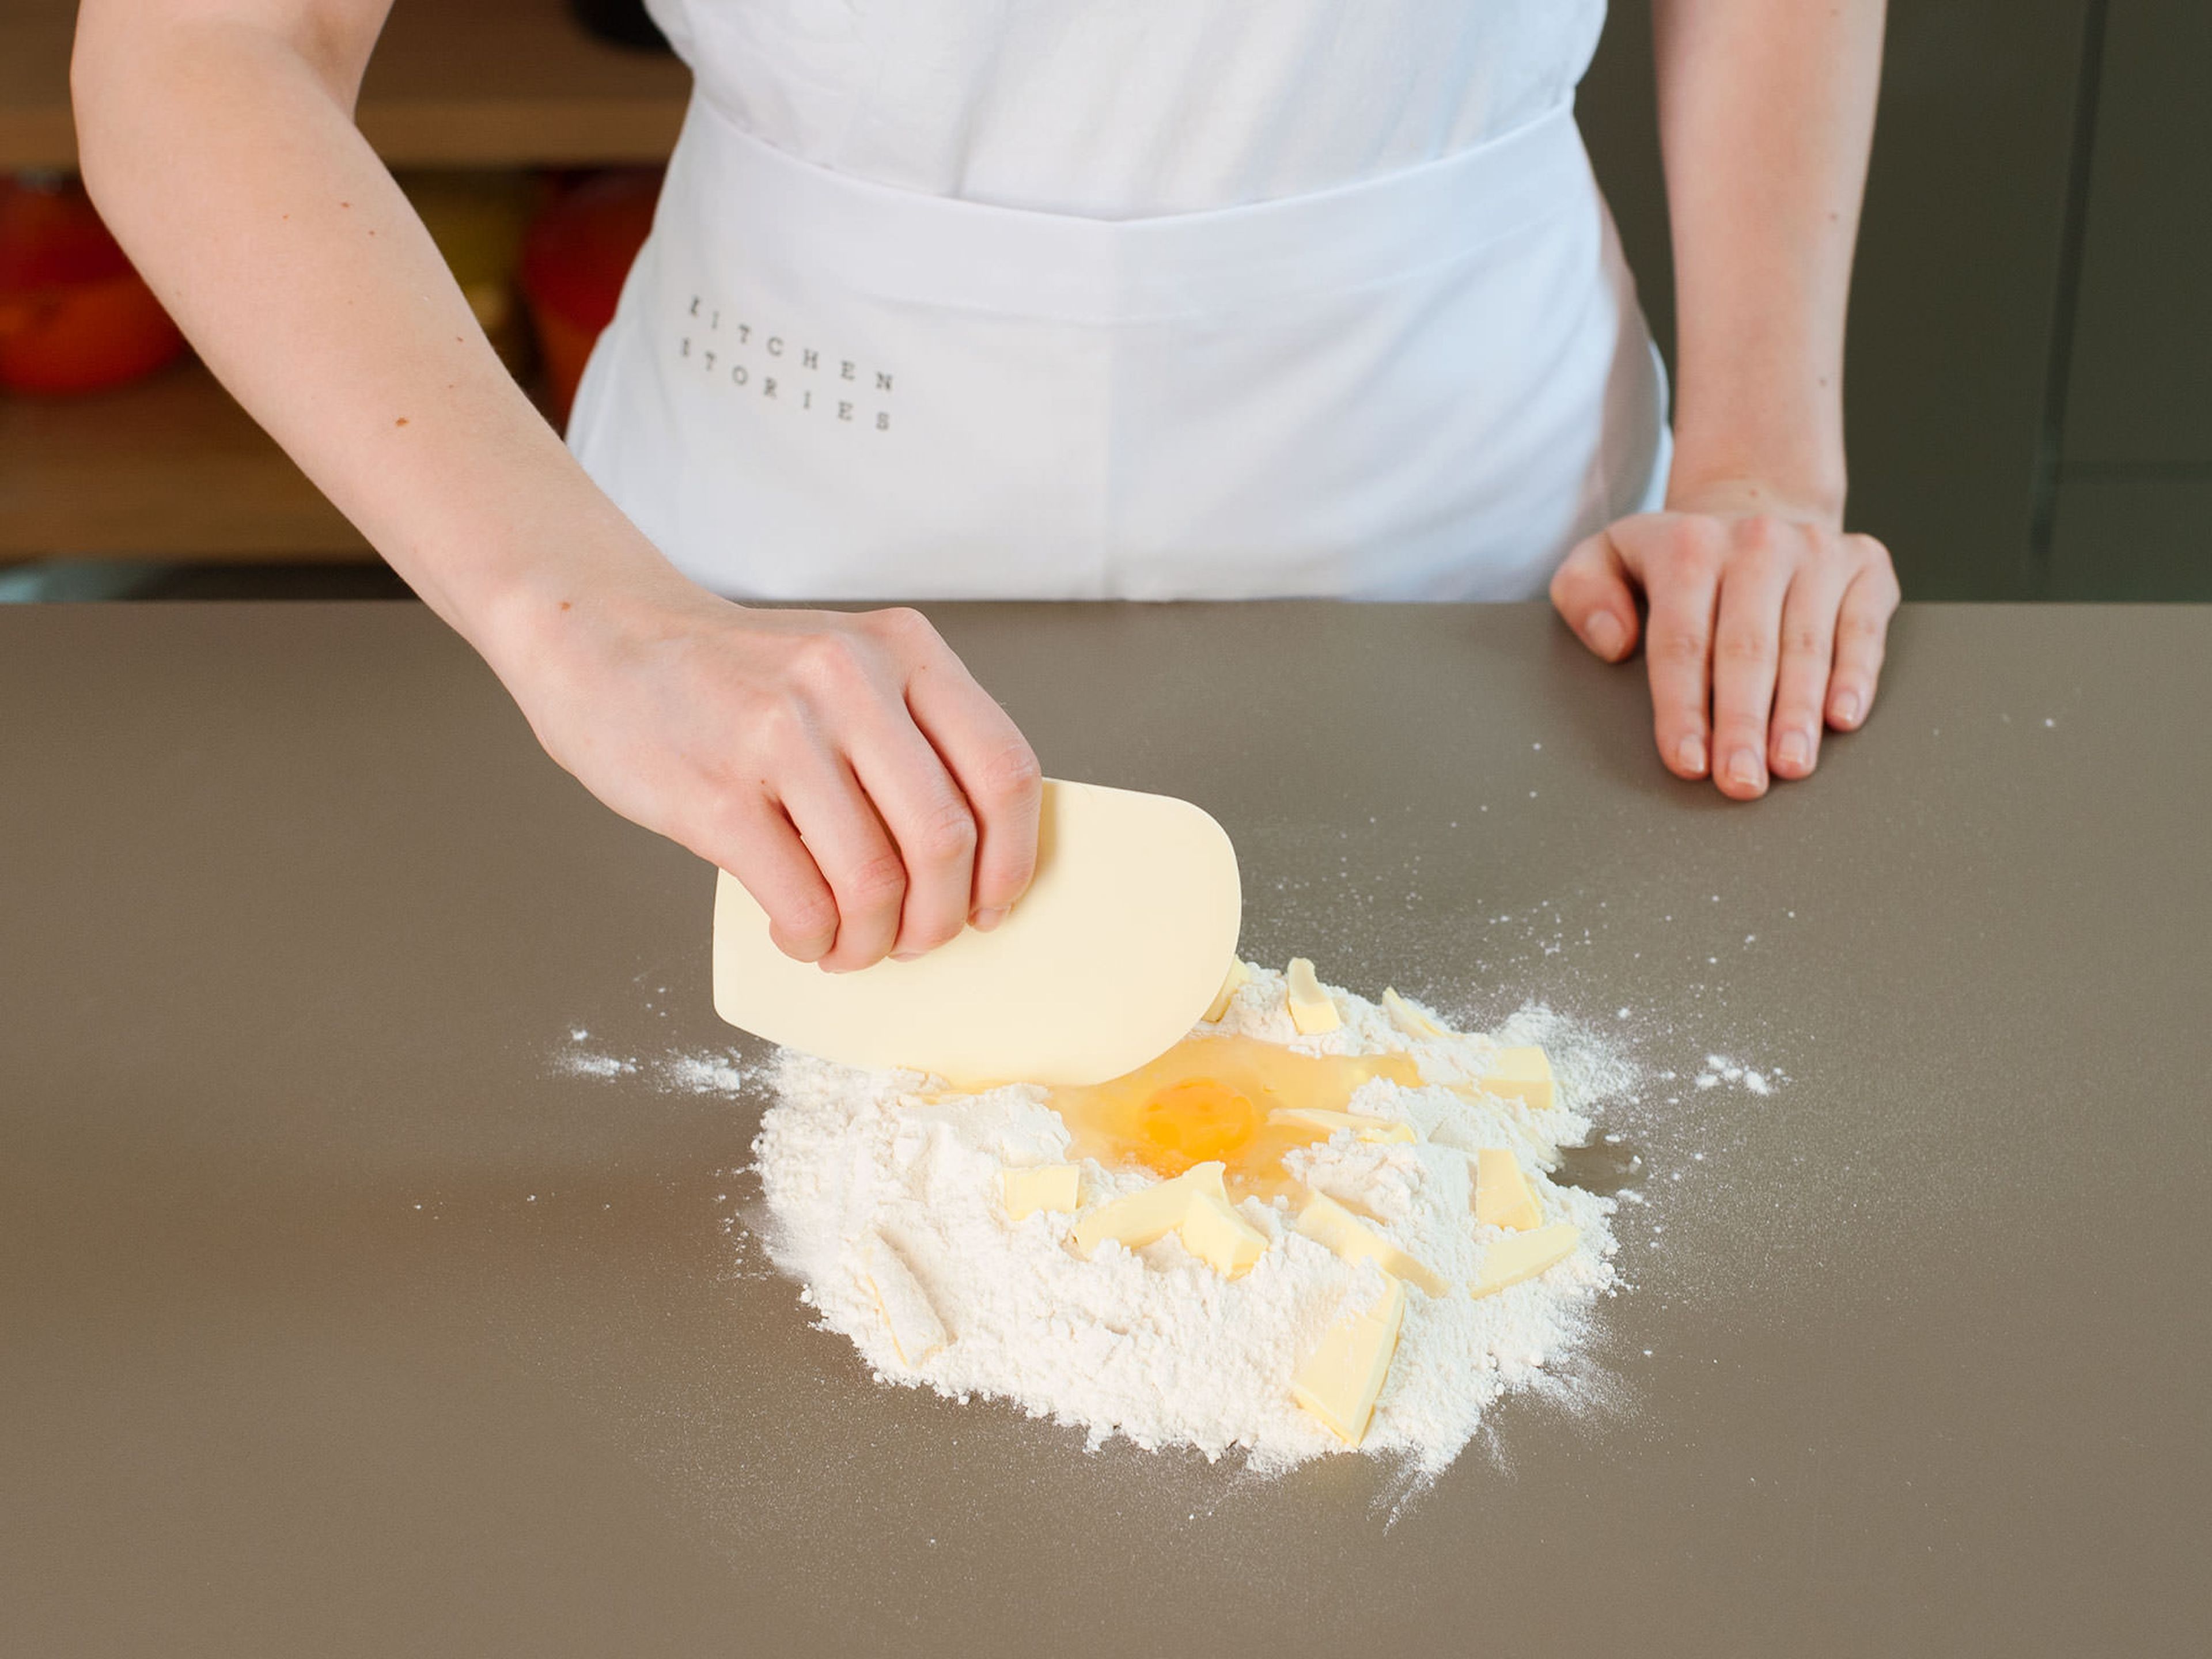 Mix together flour and salt. Transfer to a work surface, form into a mound, and create a cavity in the center. Crack egg into cavity. Cut butter into chunks, distribute on top of flour, and then cut into dough using a dough scraper. Next, use hands to thoroughly incorporate ingredients into uniform dough. Press into a flat disc. Wrap dough in plastic wrap and place in the fridge for approx. 30 min.